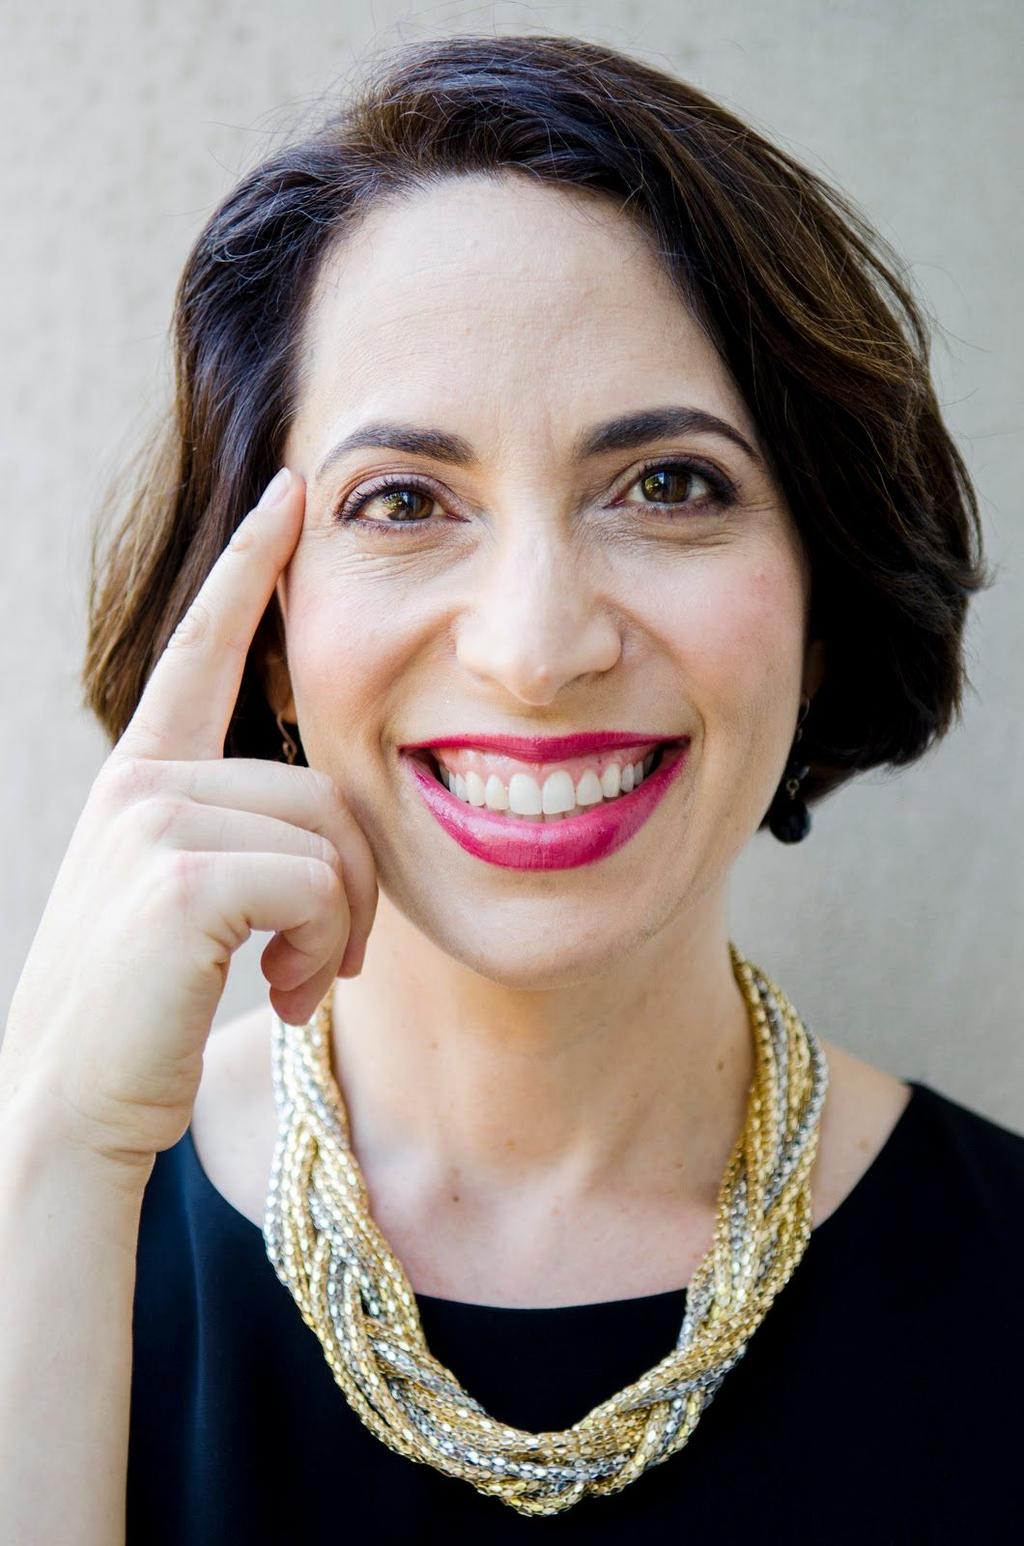 So who is this Belinda Rosenblum and Own Your Money, anyway? Belinda Rosenblum is a CPA and Wealth Expert who helps you take the worry and fear out of money.